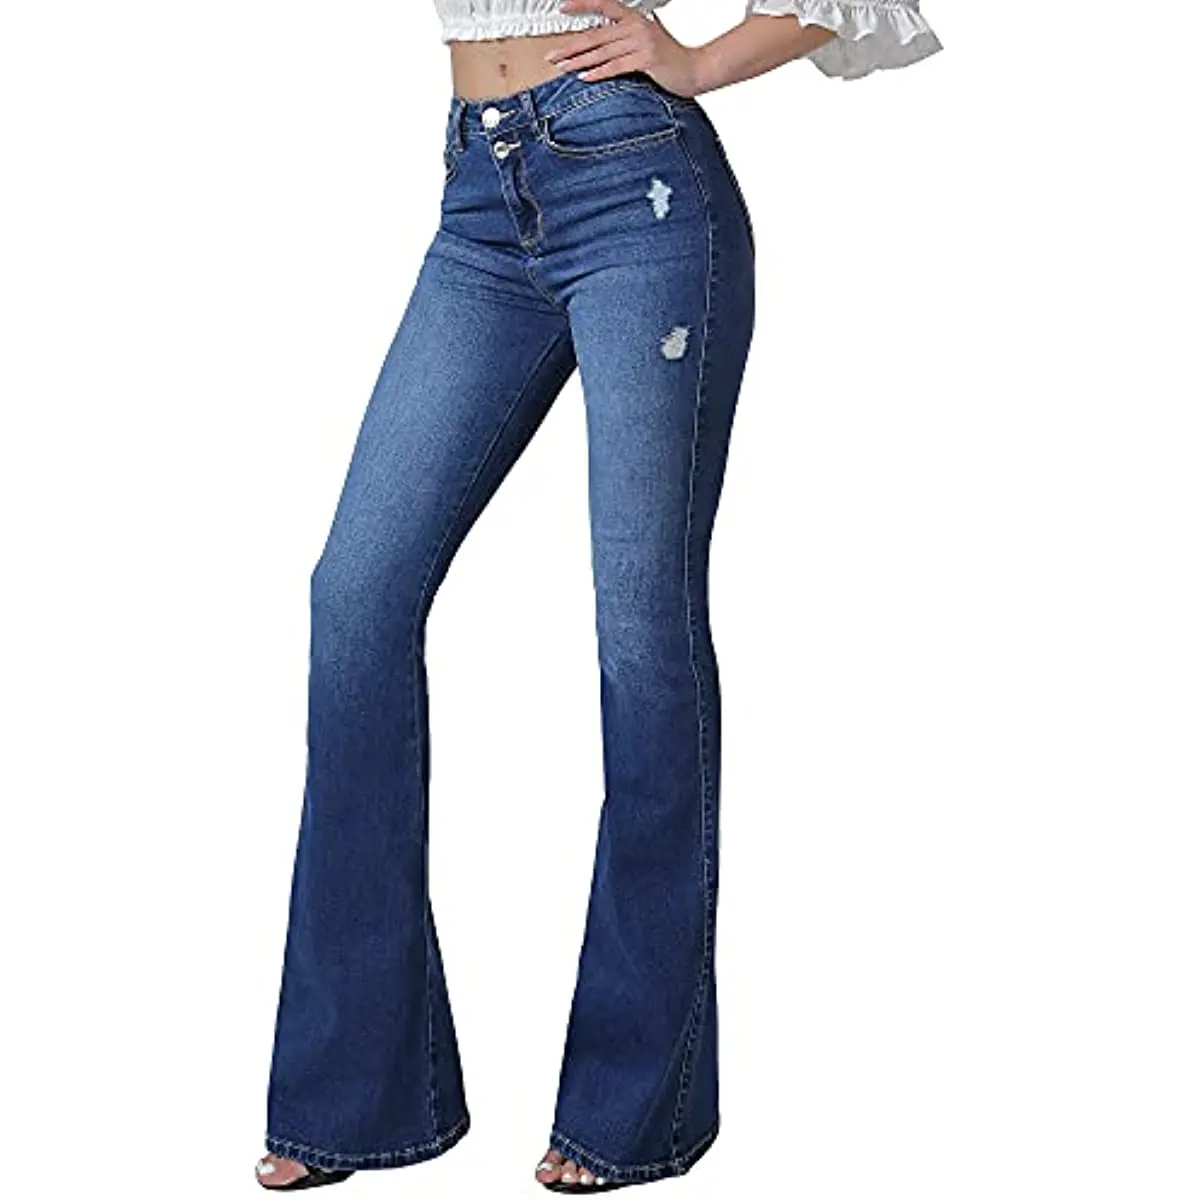 VIPONES Bell Bottom Jeans for Women High Waisted Flare Jeans with Classic Wide Leg Ripped Denim Pants streetwear